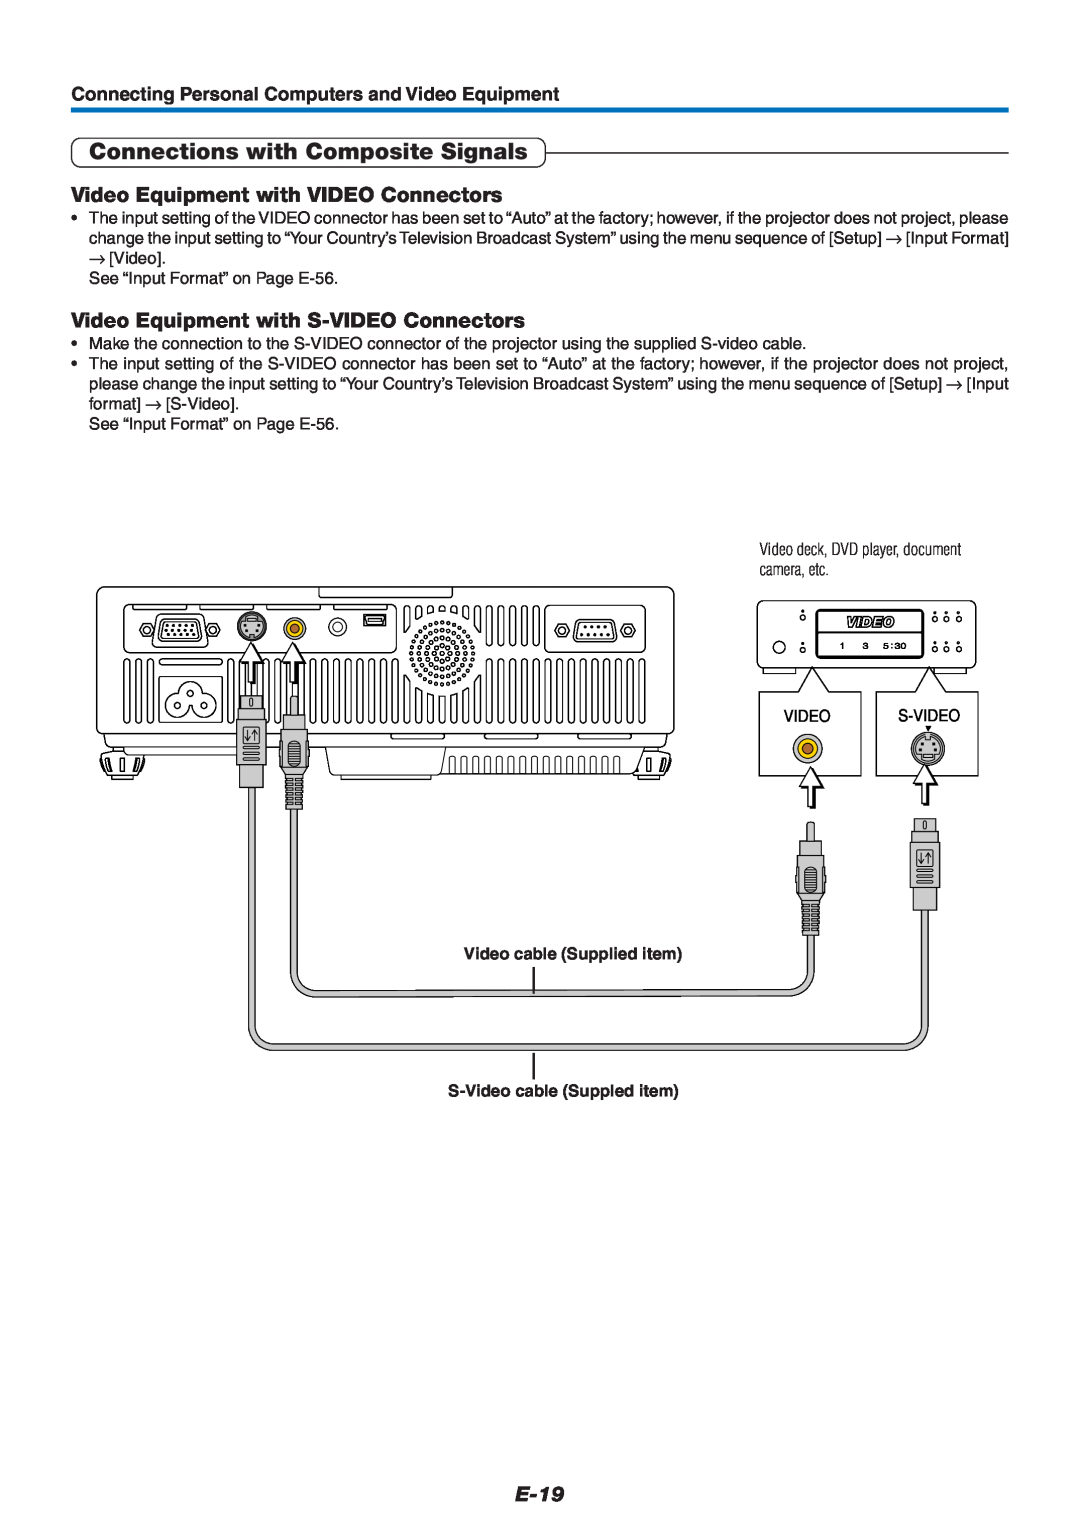 PLUS Vision U5-512, U5-632, U5-532 Connections with Composite Signals, Video Equipment with VIDEO Connectors, E-19 